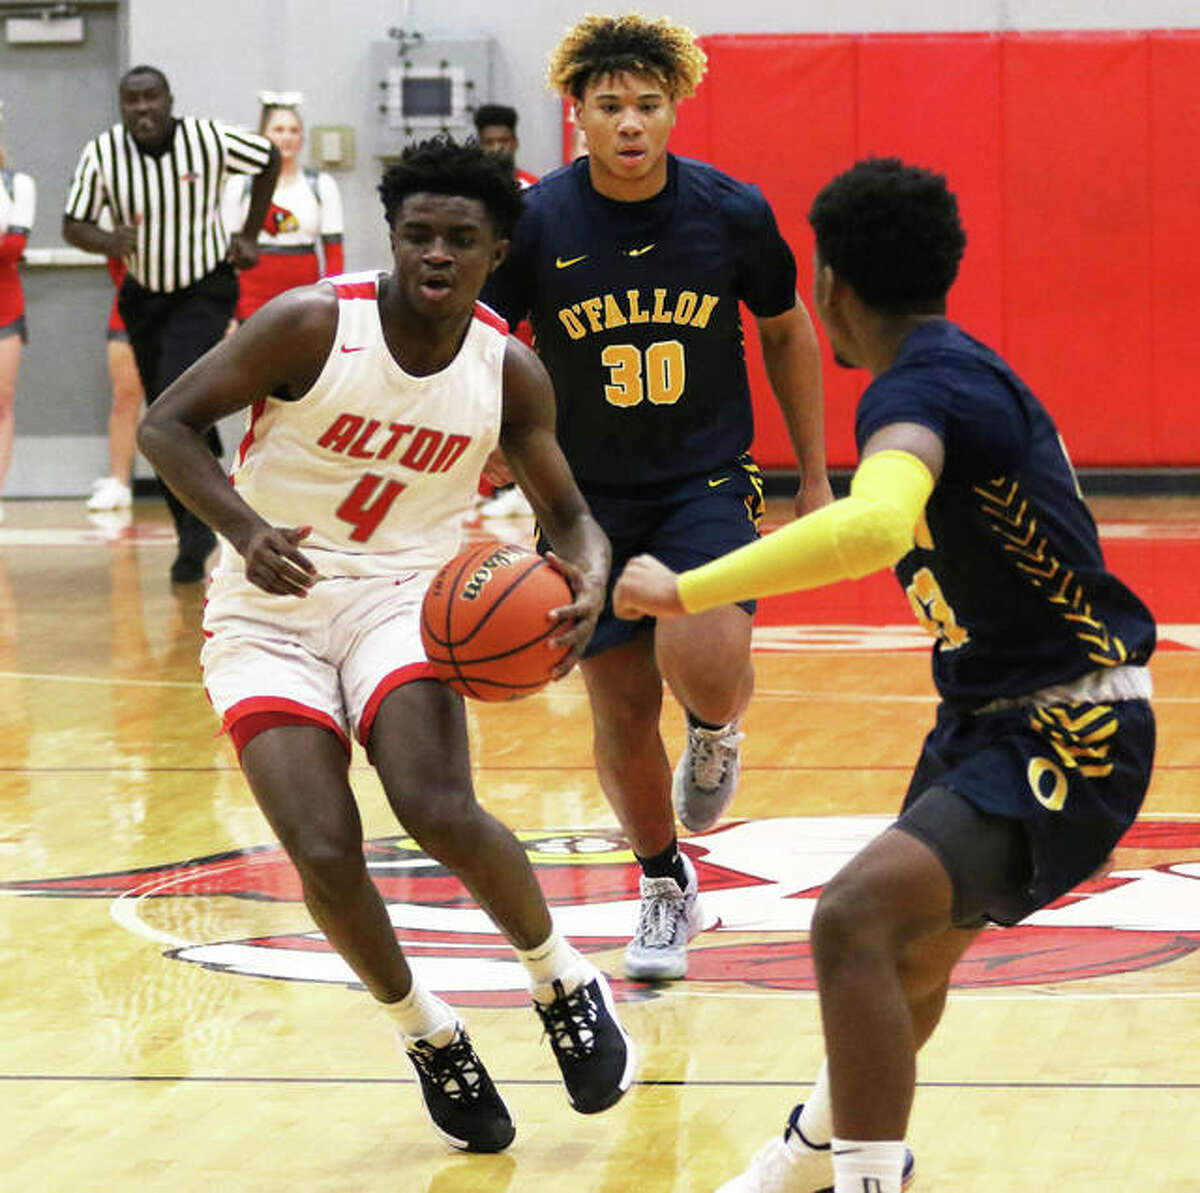 Alton’s Ky’lun Rivers (4) pushes the ball upcourt in a SWC game against O’Fallon on Dec. 10 at Alton High in Godfrey. The Redbirds closed their pre-Christmas schedule Saturday with a victory over Newburgh (Ind.) Castle at the Bosse Winter Classic shootout in Evansville, Ind.